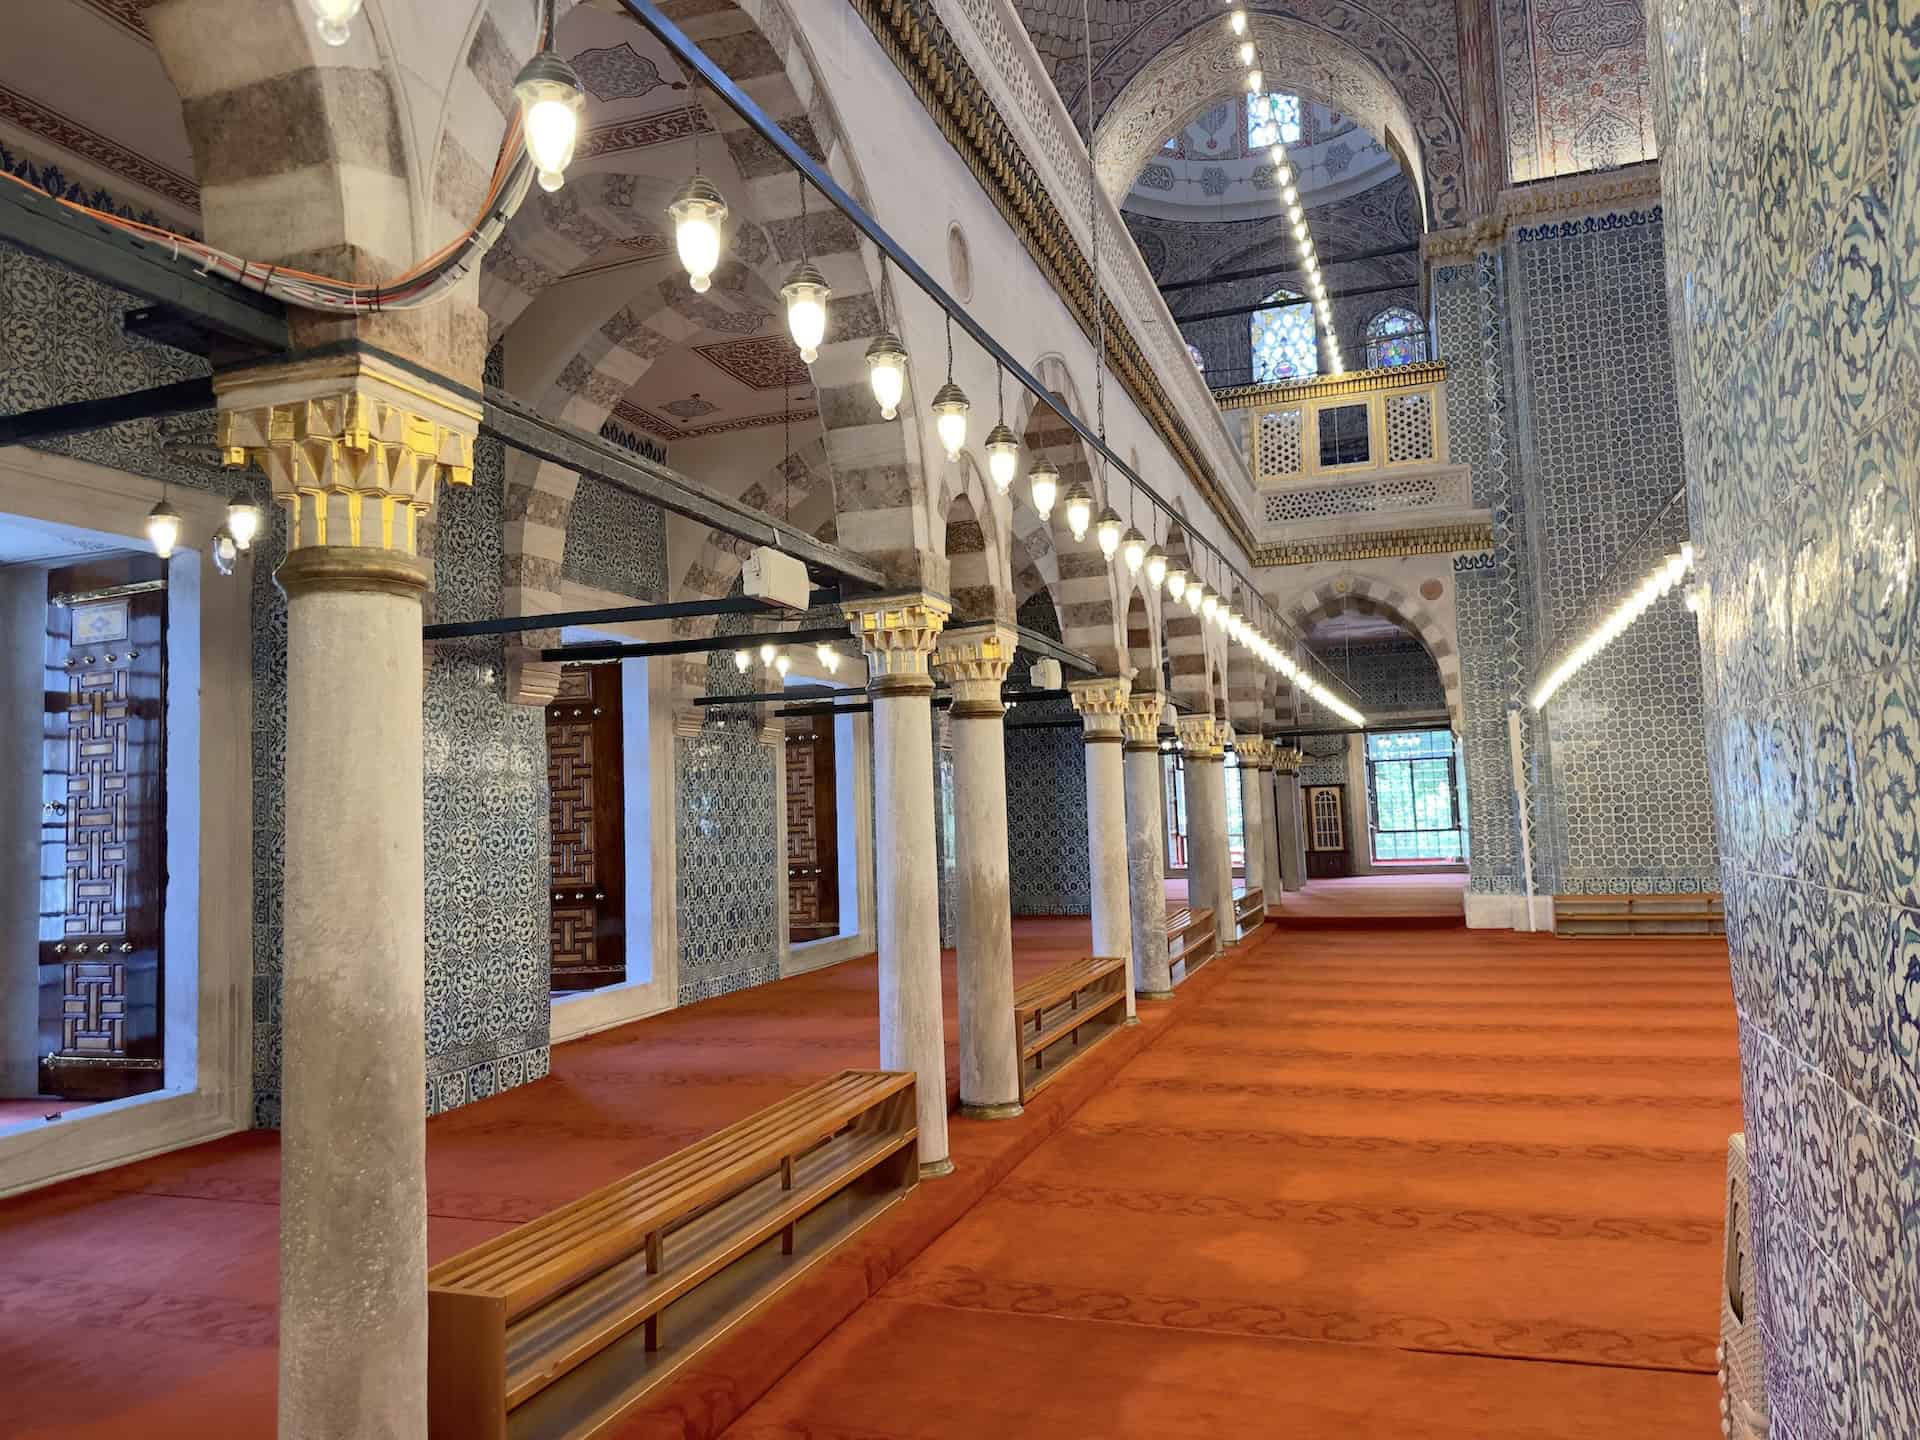 Colonnade on the left side of the prayer hall